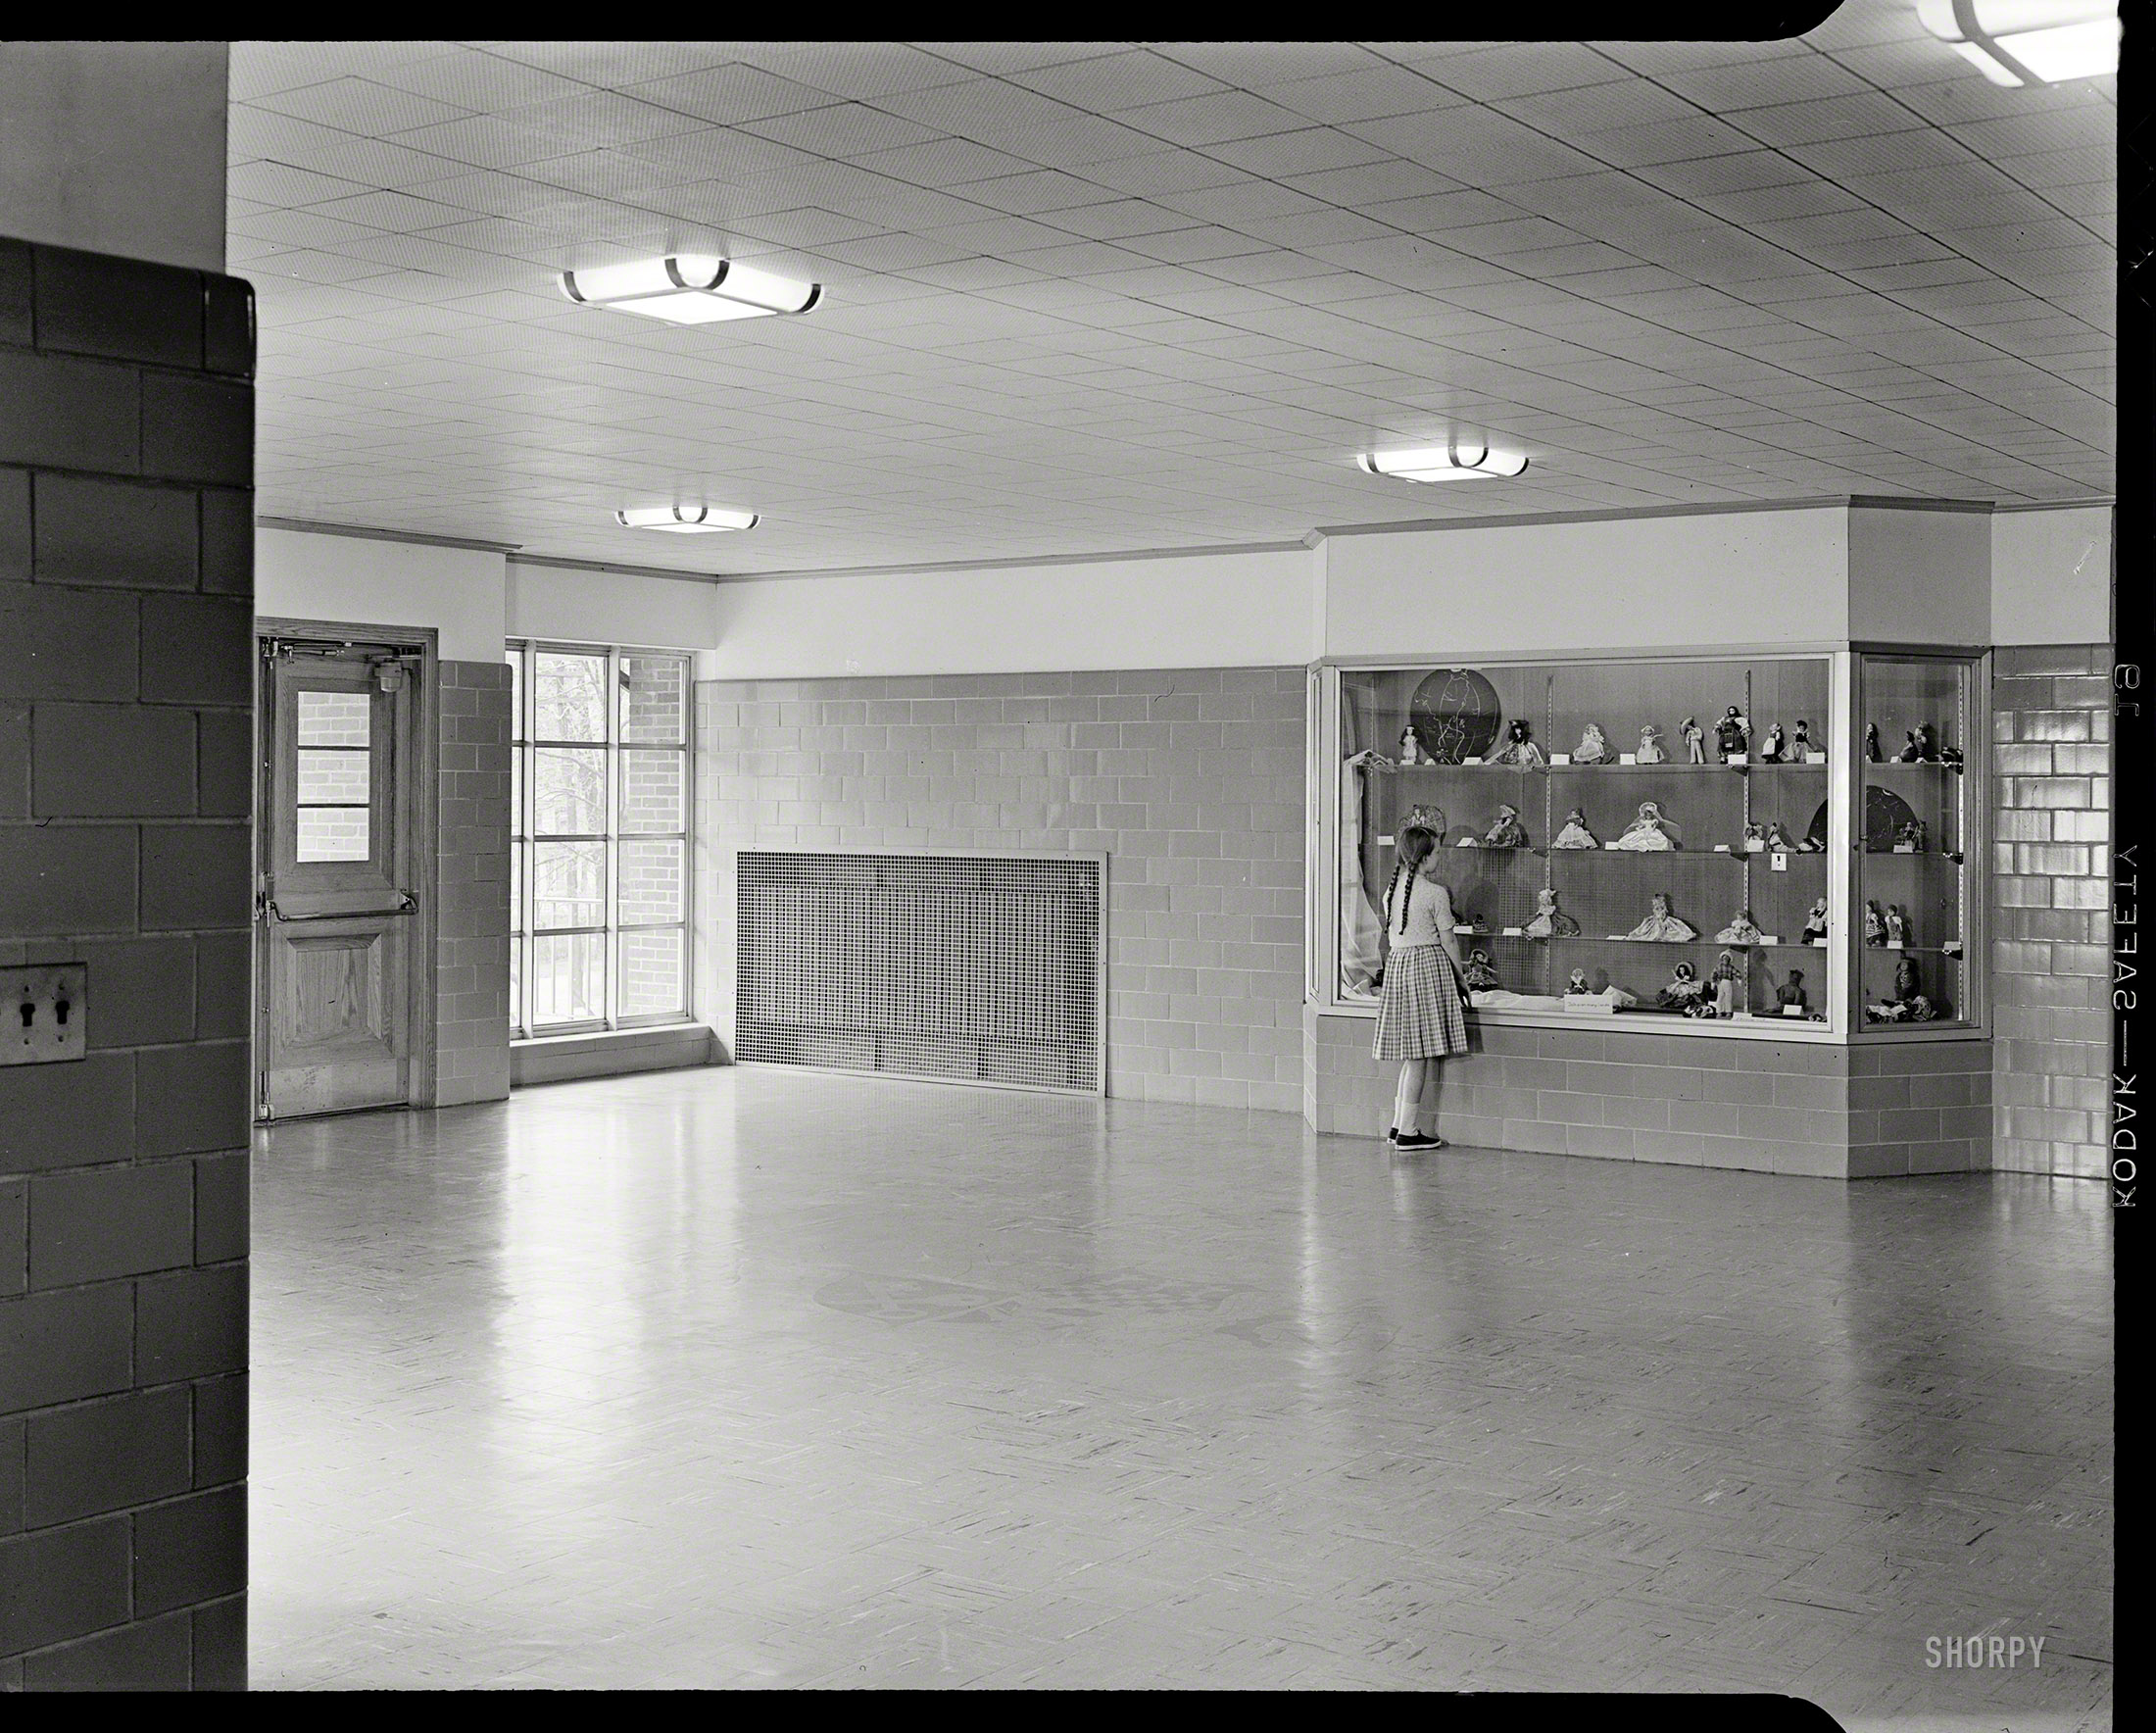 April 28, 1952. "Walter R. Dolan Junior High School, Toms Road, Stamford, Connecticut. Entrance foyer." Continuing today's girls-and-dolls theme. Large-format acetate negative by Gottscho-Schleisner. View full size.